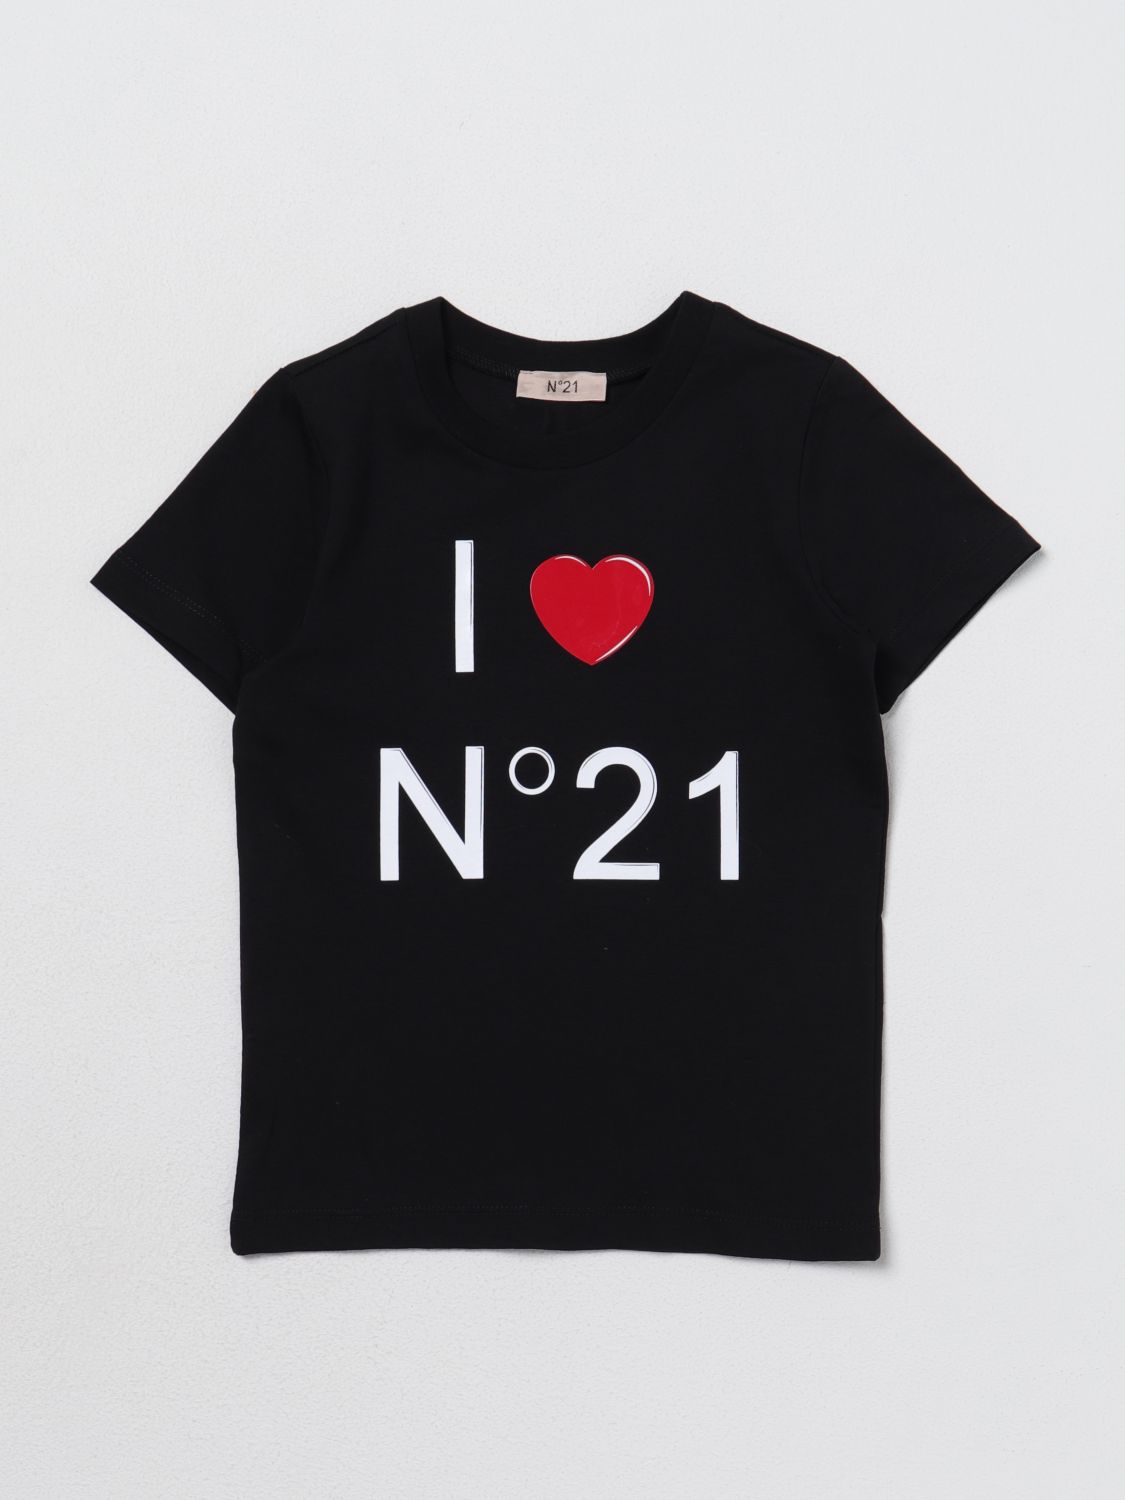 N°21 T-SHIRT IN COTTON,391429002